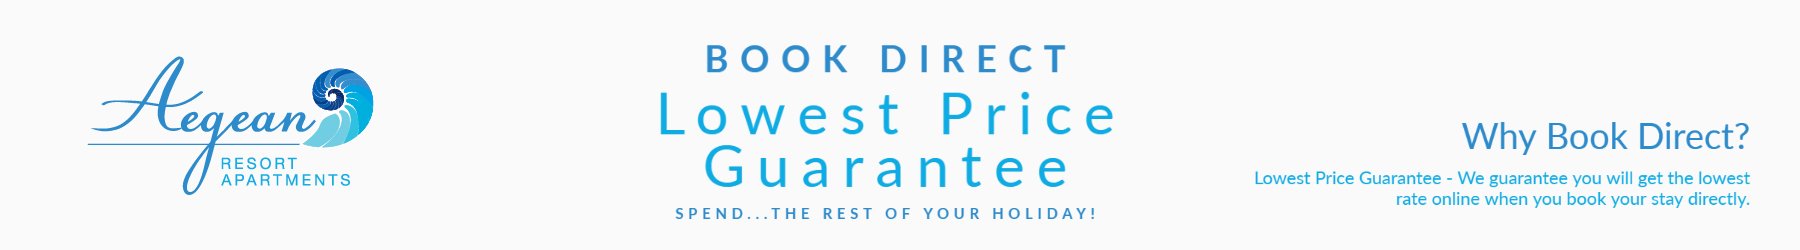 Book-direct-save-lowest-price-guarantee-banner